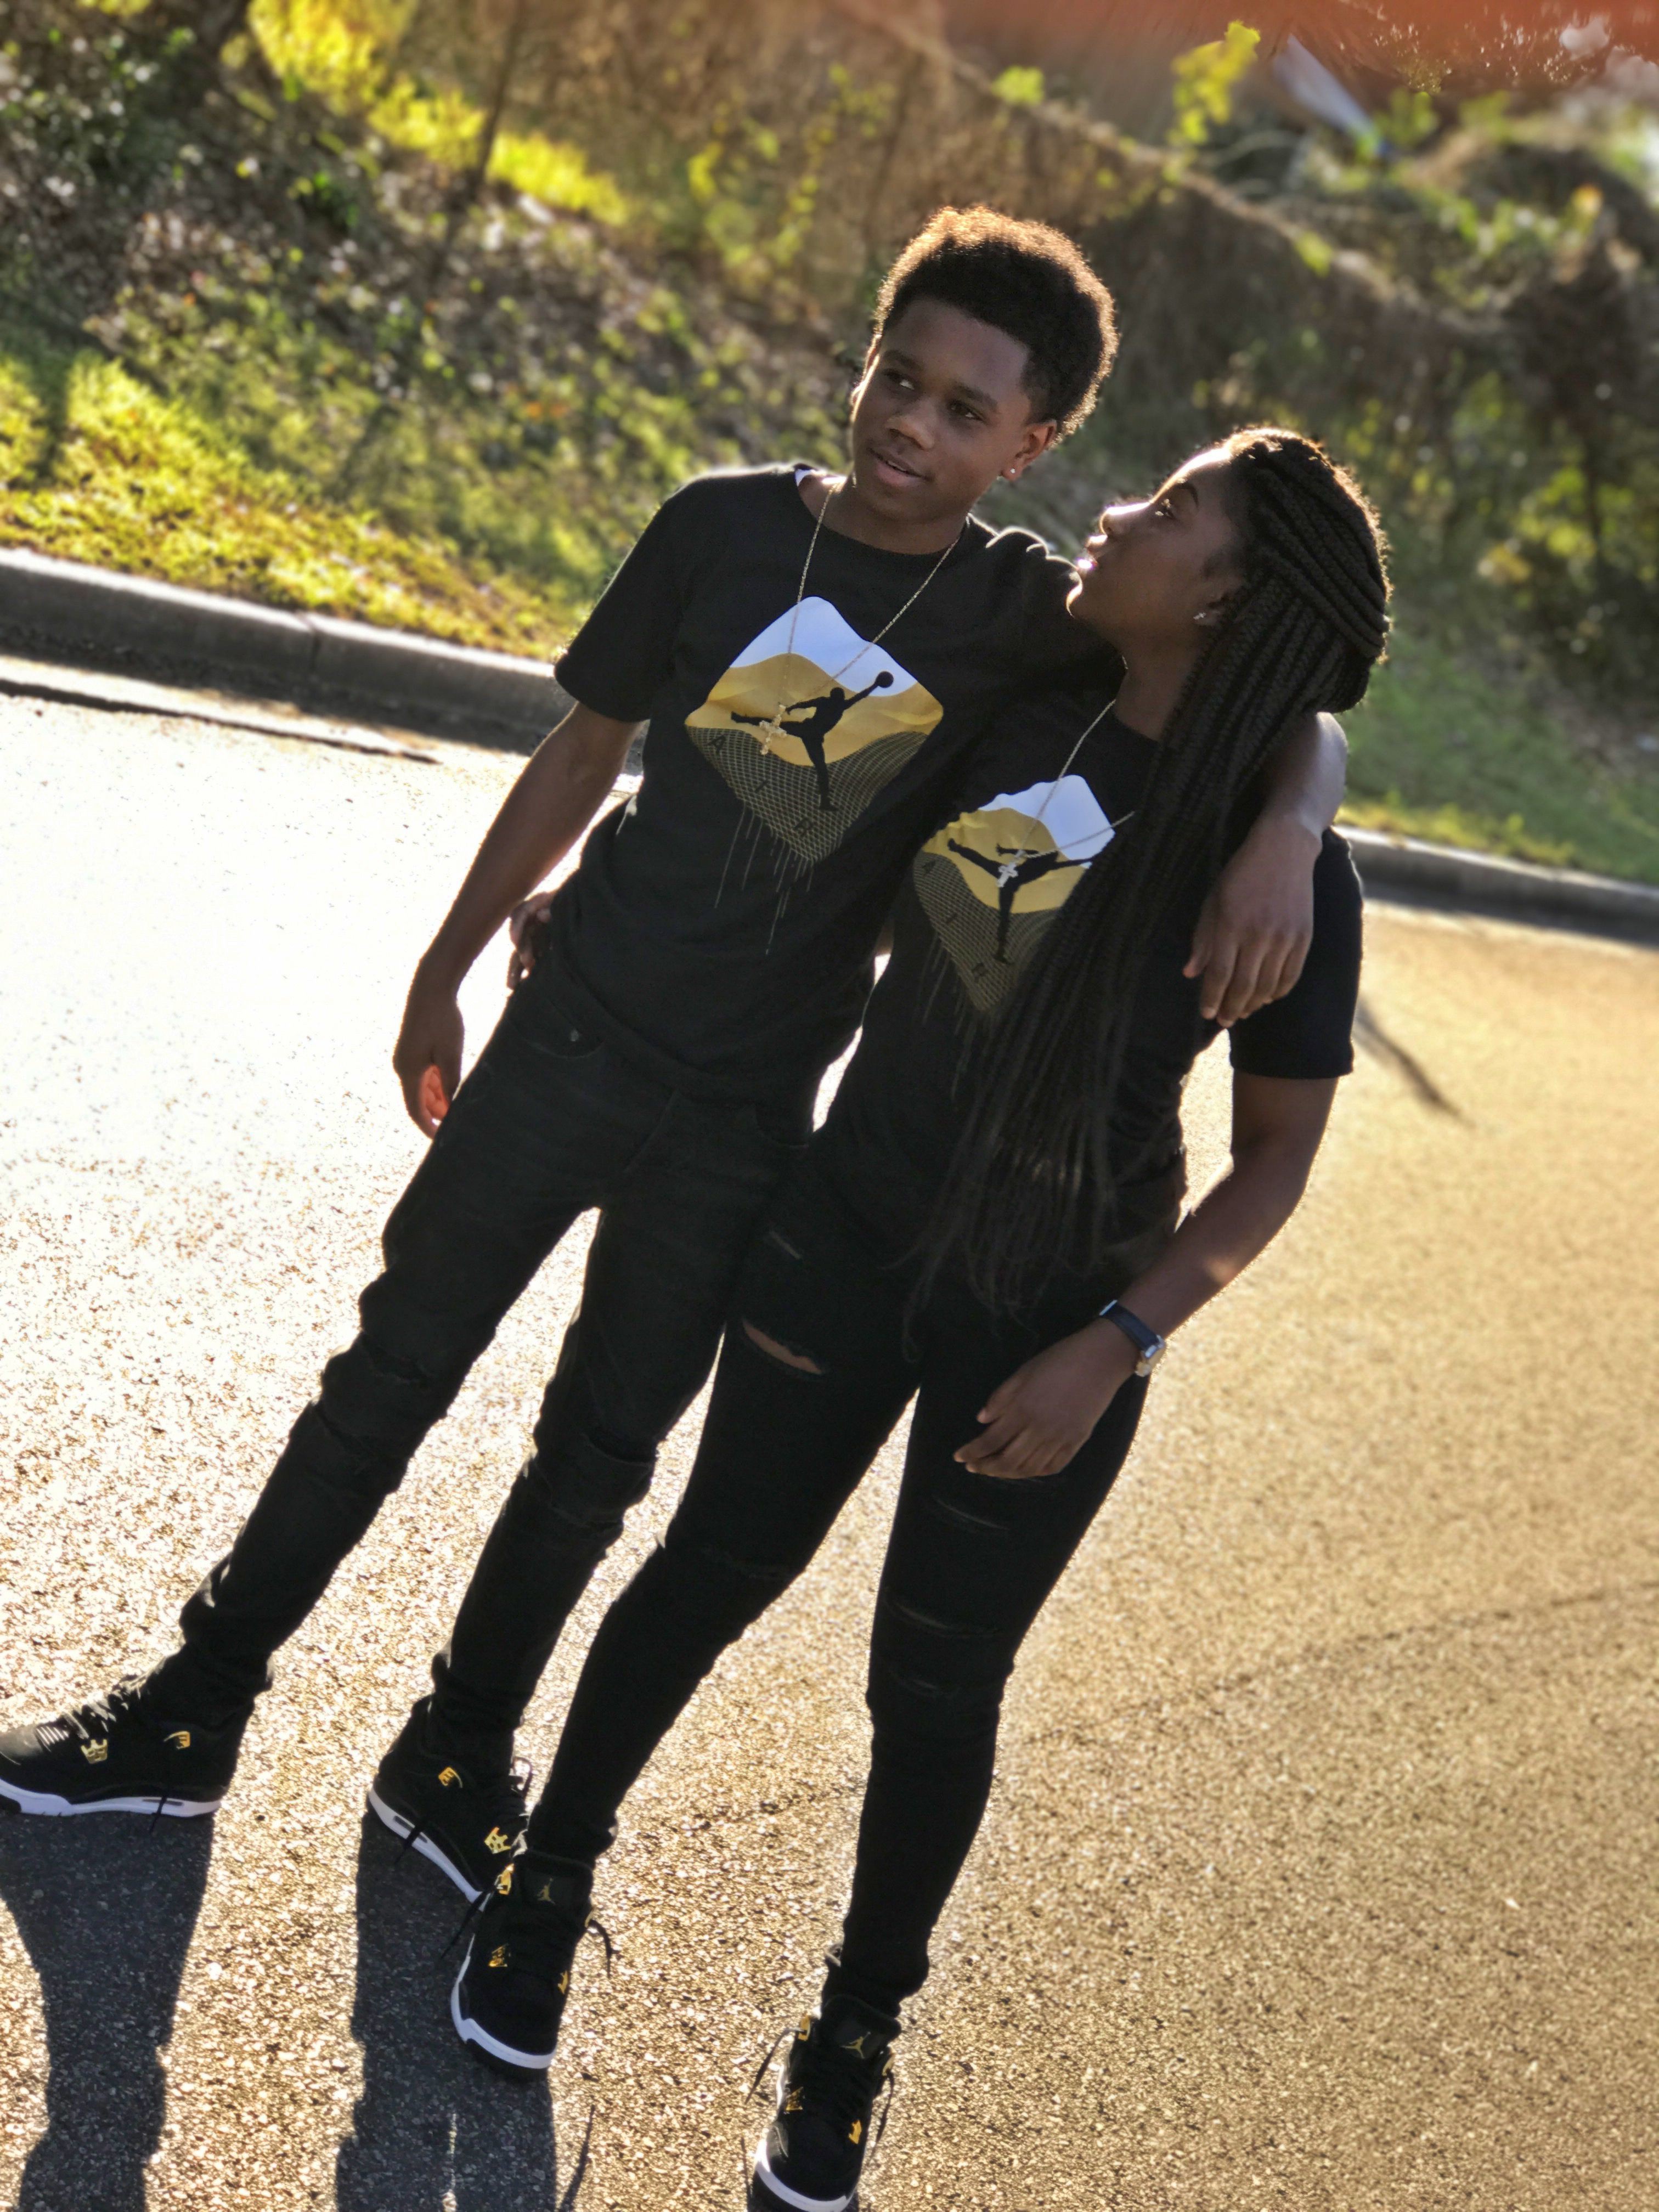 Matching cute black couple, interpersonal relationship, popular loner, gabriel conte, black people, queen naija: Black people,  Queen Naija,  Gabriel Conte,  Matching Couple Outfits  